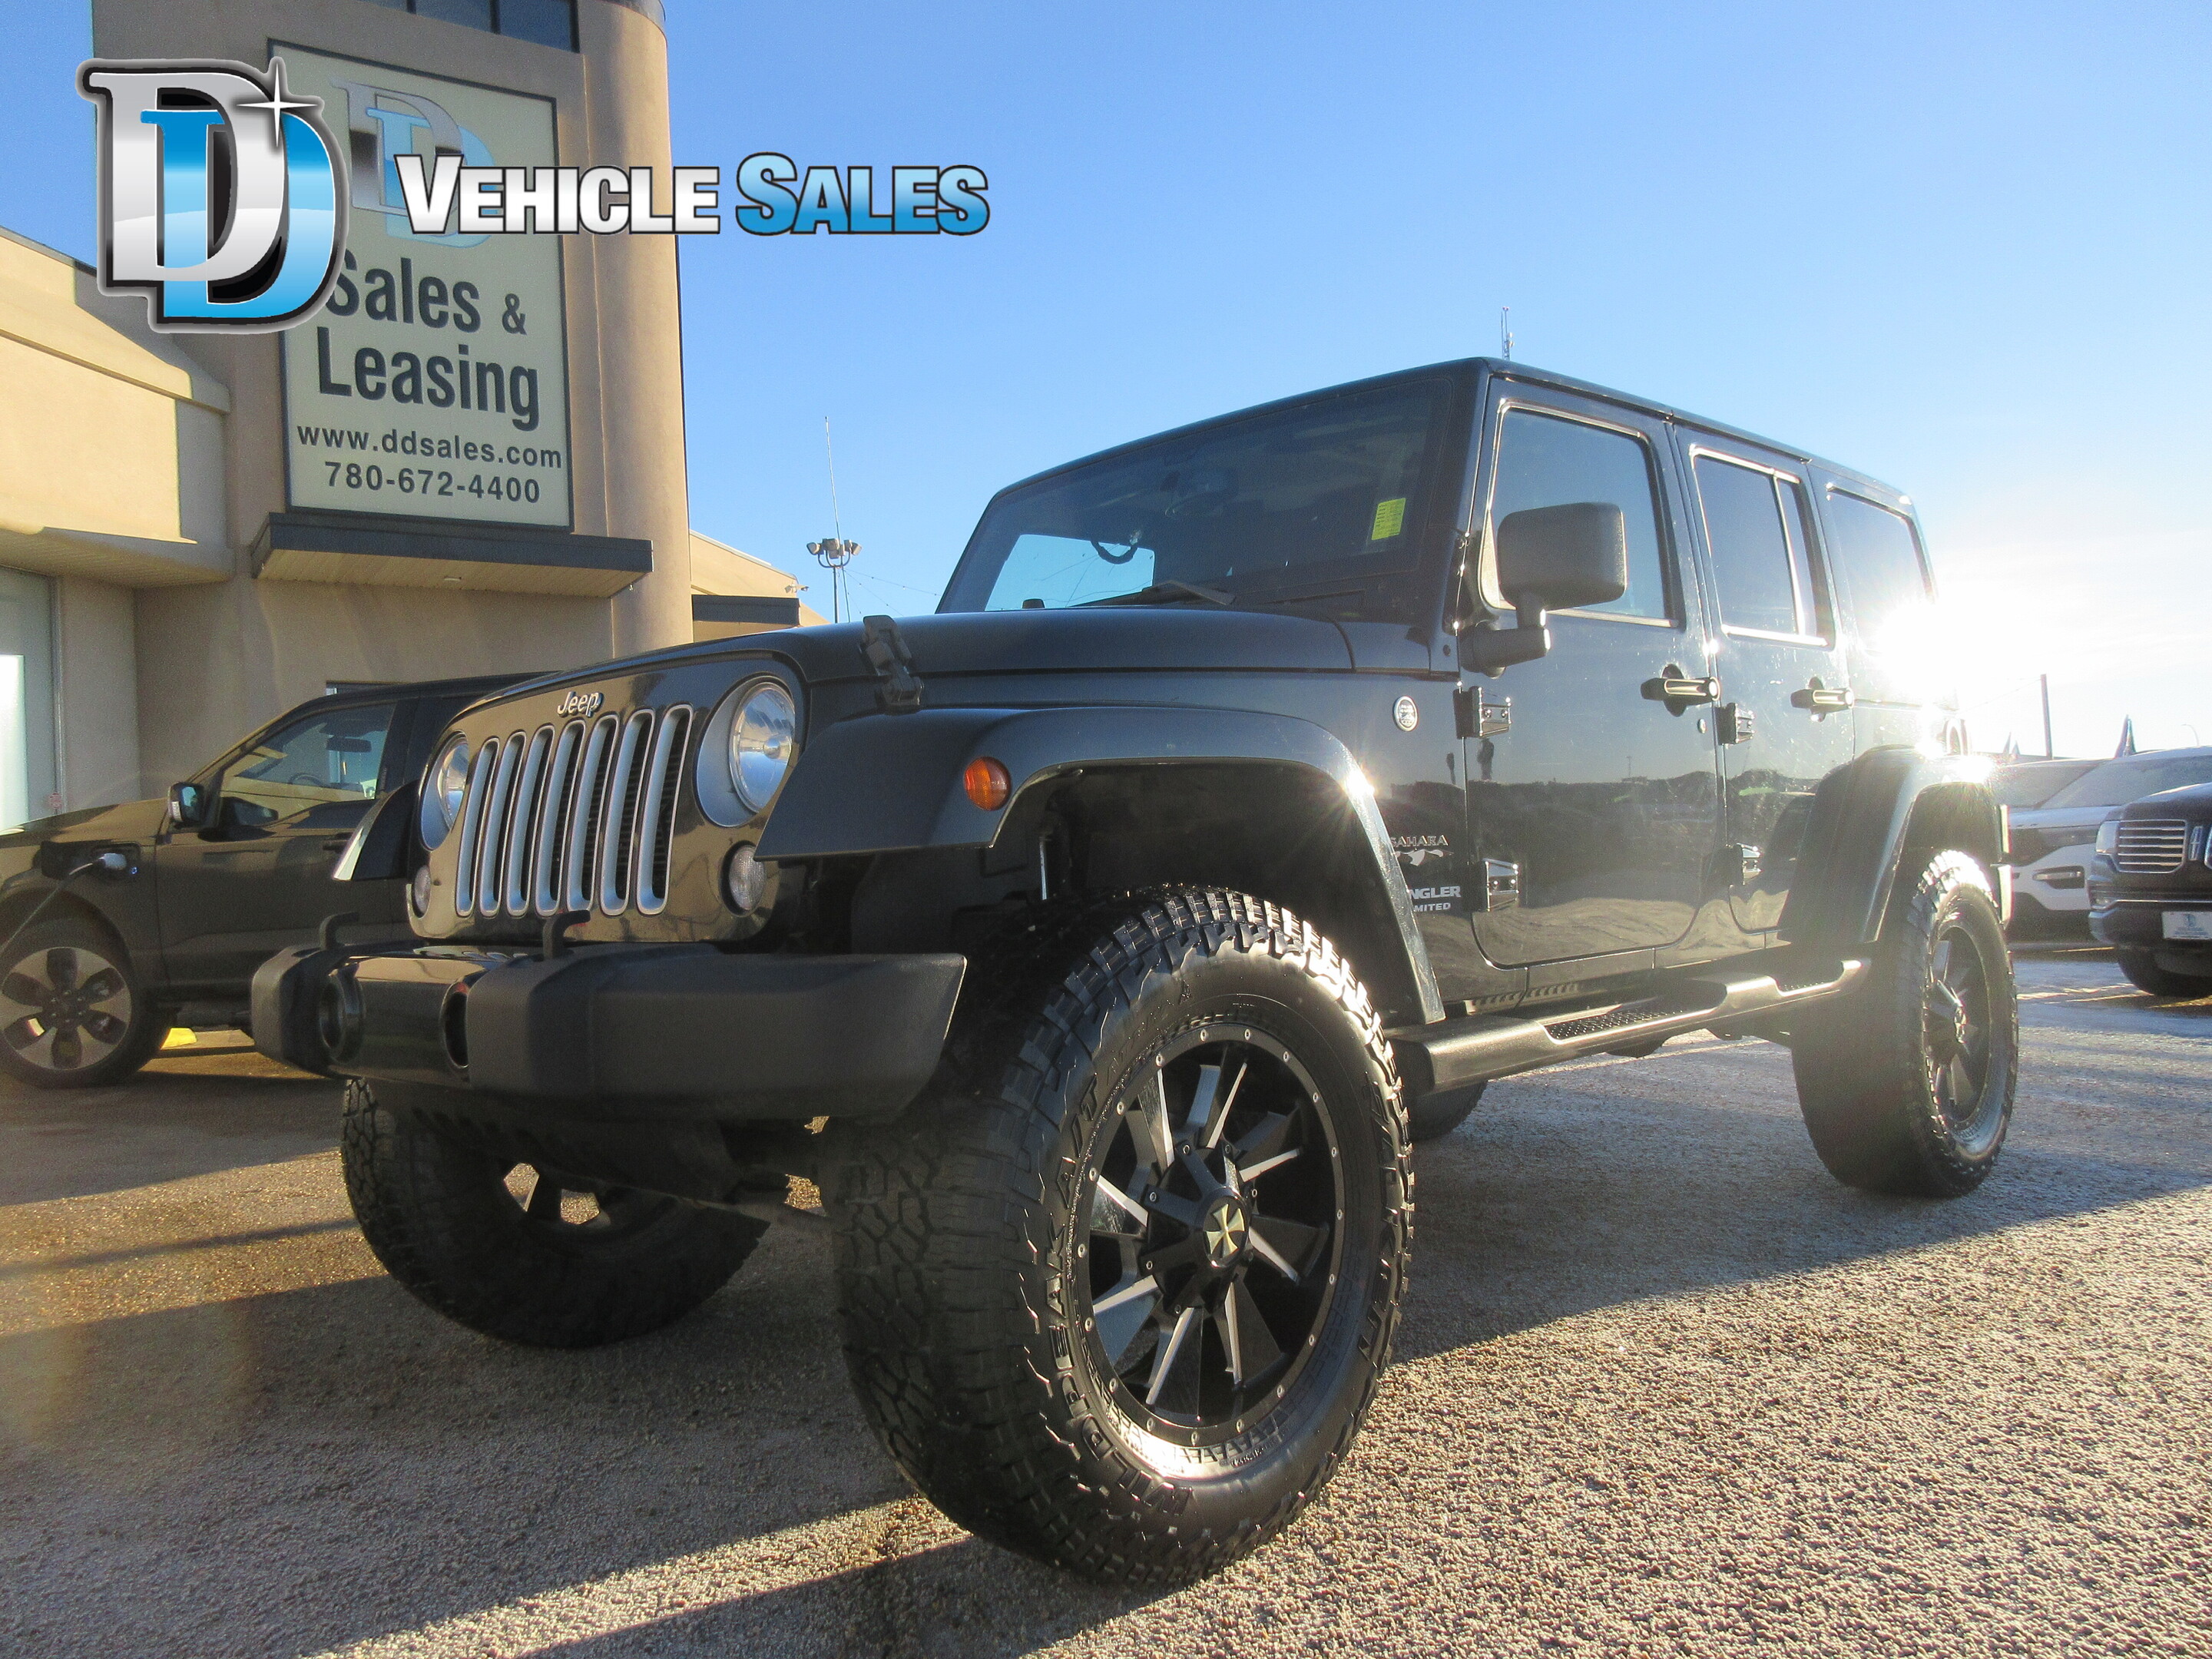 2016 Jeep WRANGLER UNLIMITED Sahara/Touchscreen/Removable Top - NO CREDIT CHECK